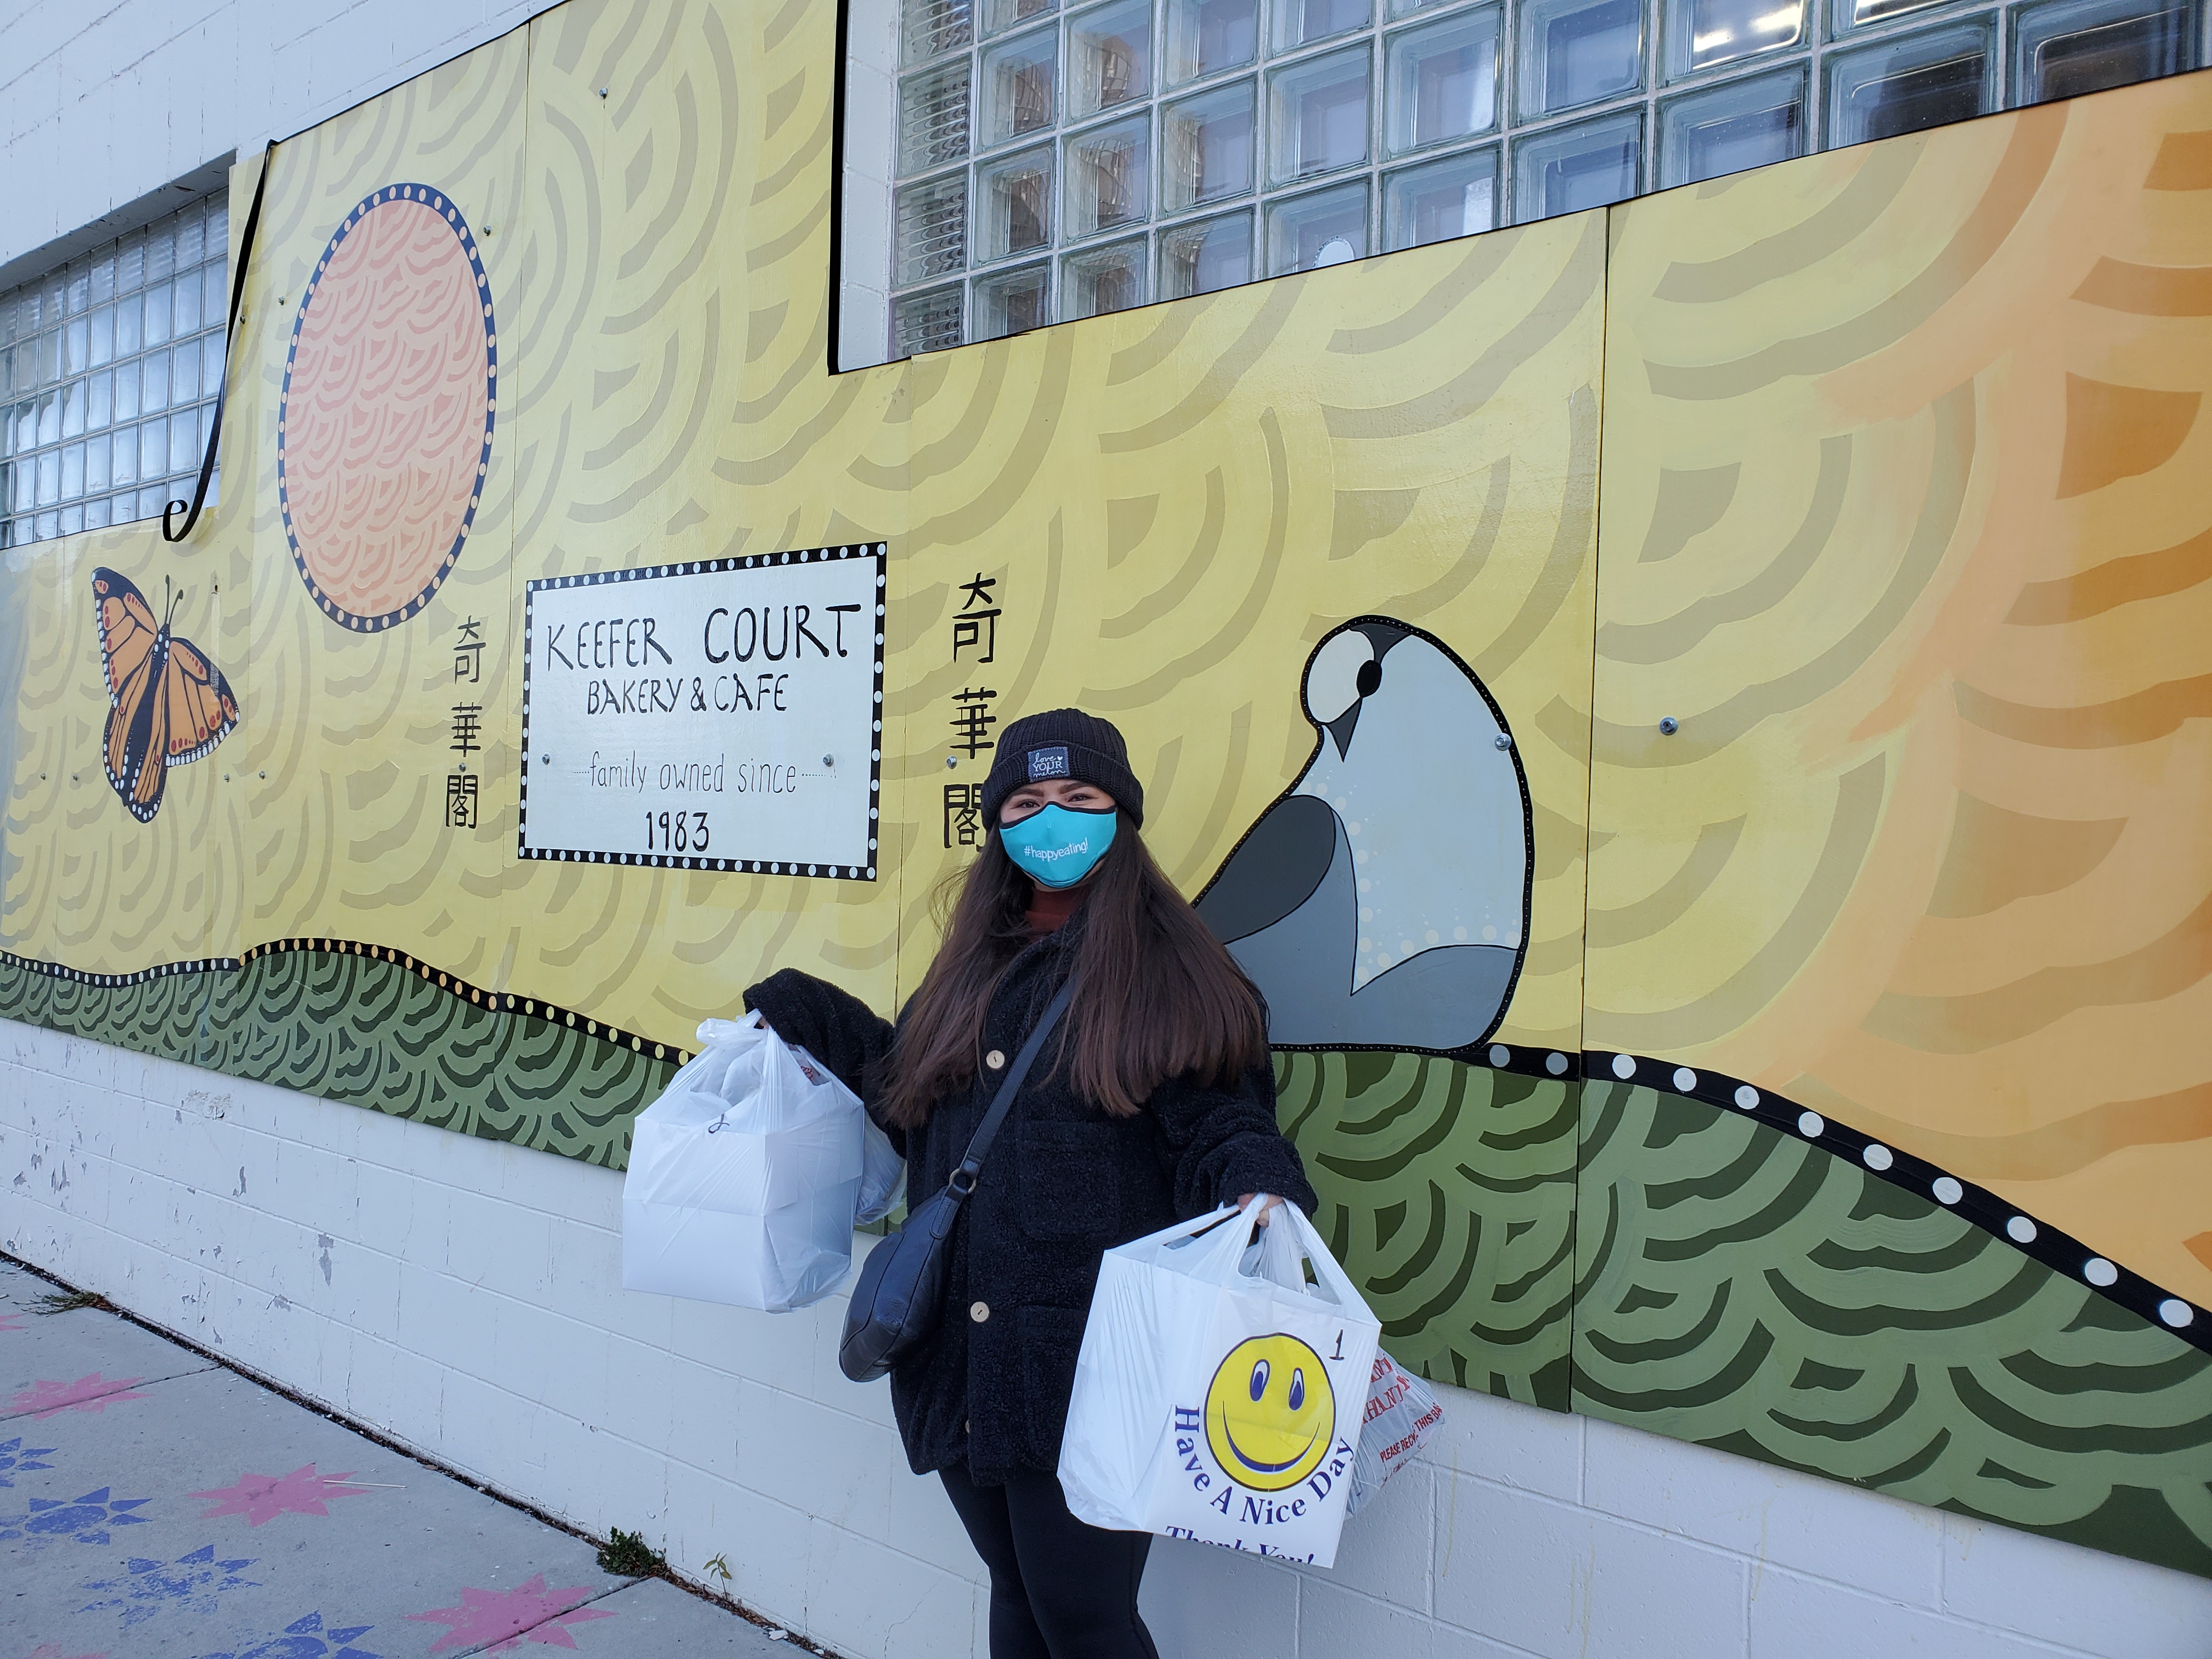 Me in front of the mural at Keefer Court holding huge bags of take out. The mural behind me reads "Keefer Court family owned since 1983".